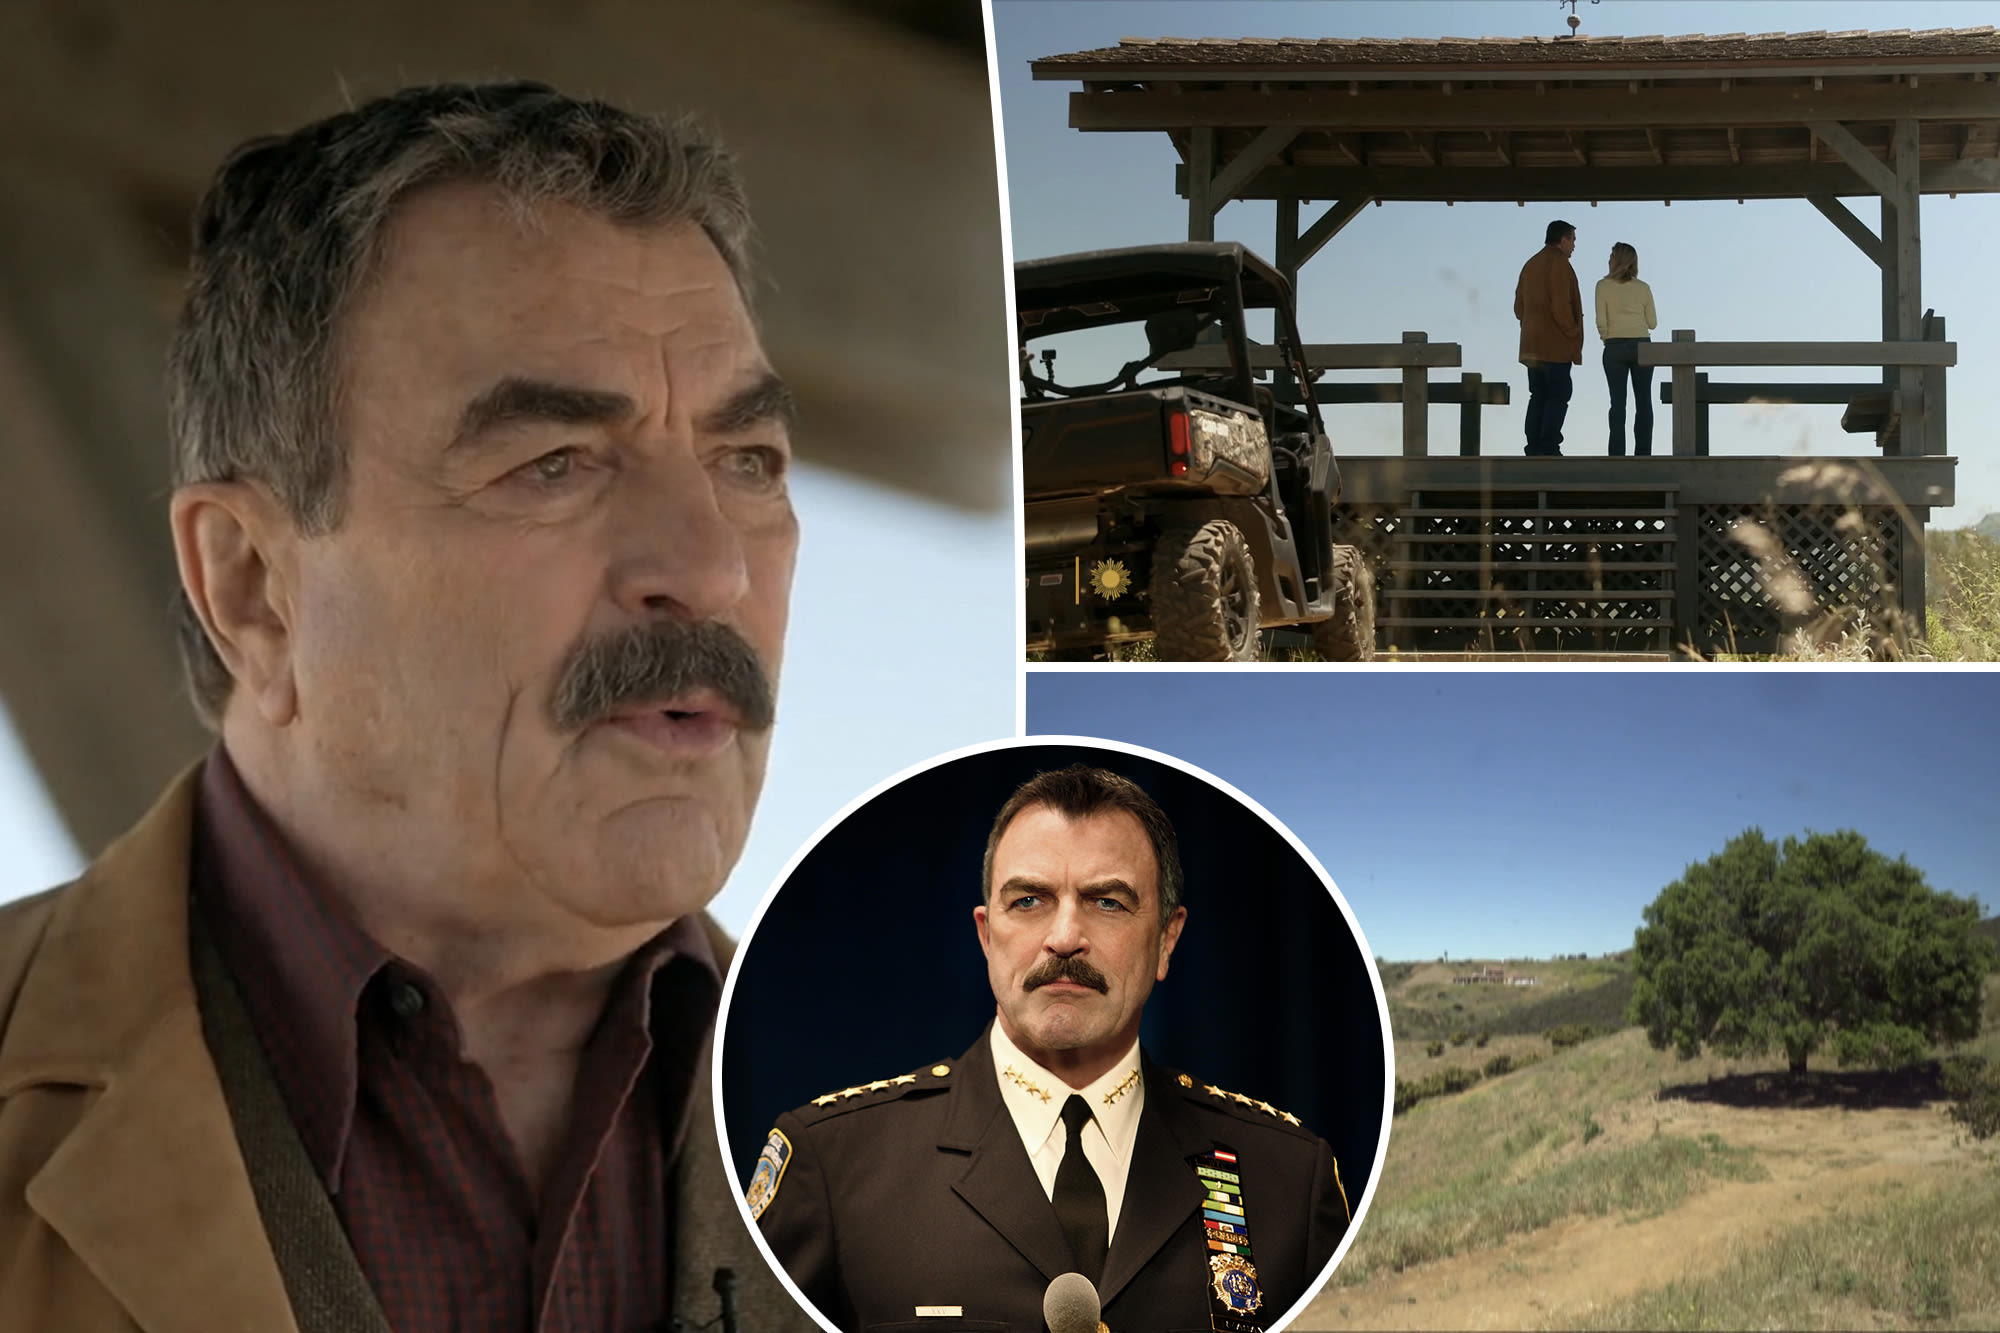 Tom Selleck berates CBS over ‘Blue Bloods’ cancellation — will he retire?